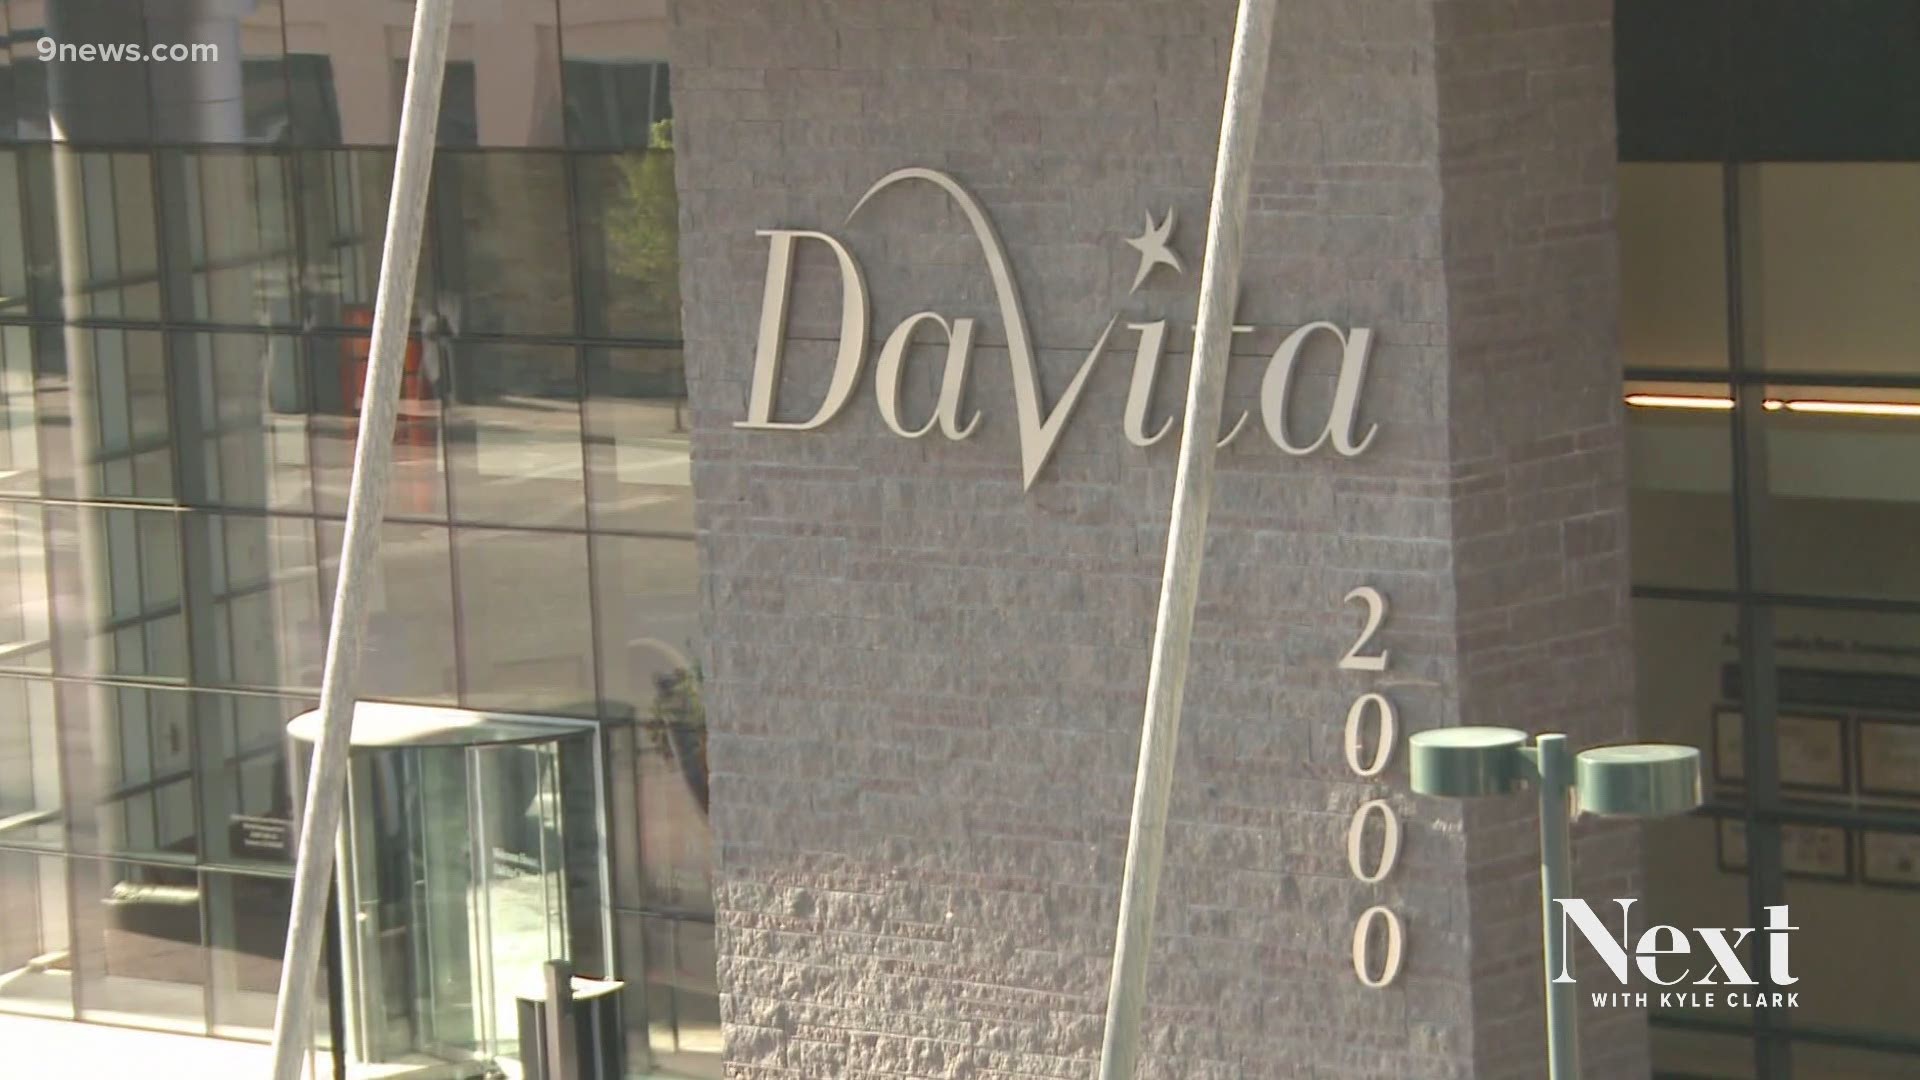 DaVita and its former CEO Kent Thiry have been indicted by a federal grand jury for labor market collusion. DaVita is Denver's 10th largest employer.